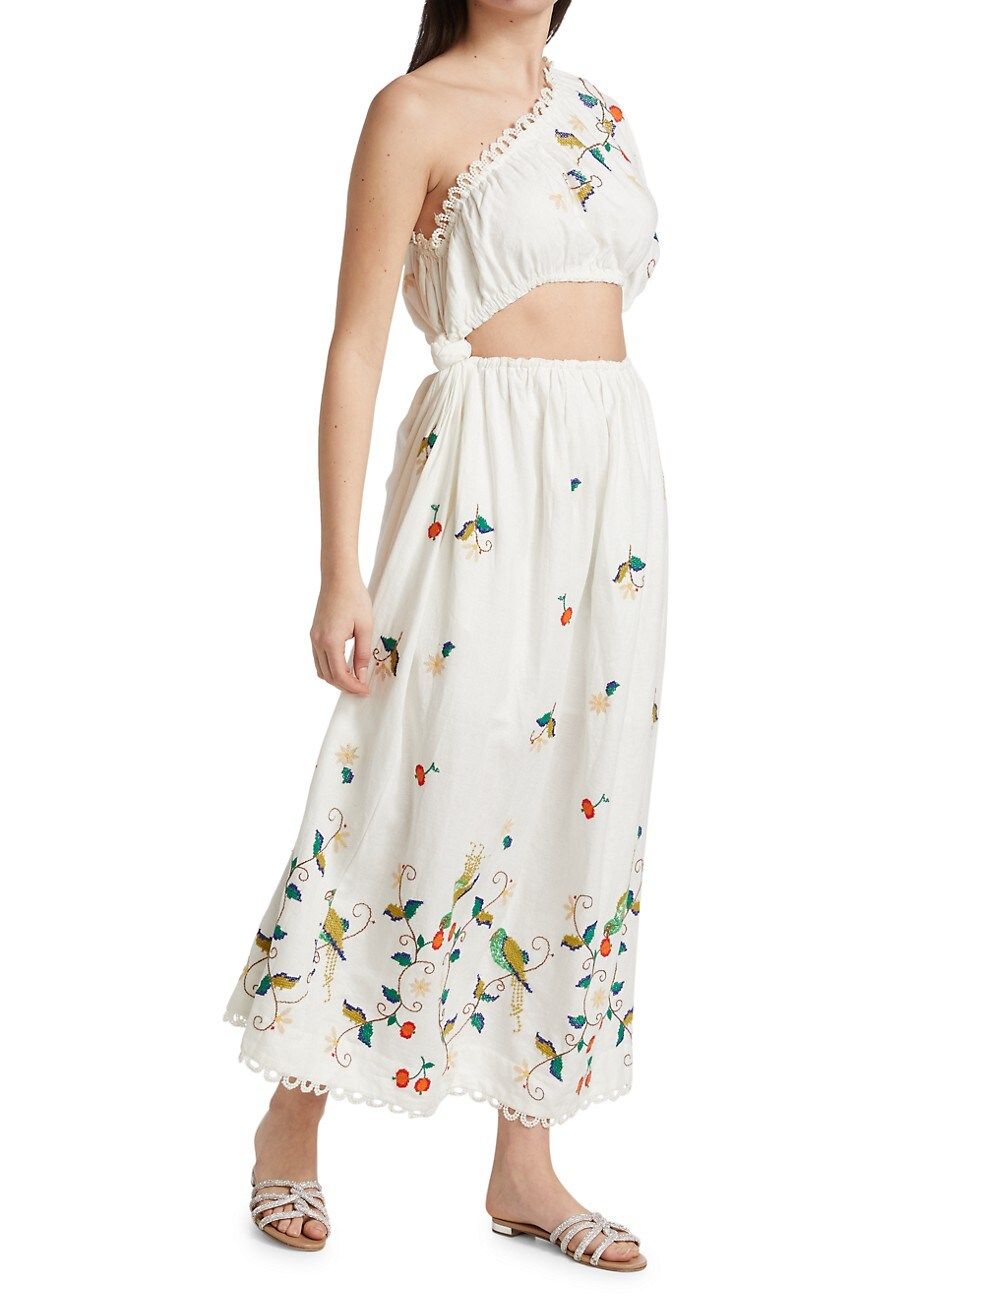 Pitanga Embroidered One-Shoulder Cut-Out Maxi Dress | Saks Fifth Avenue